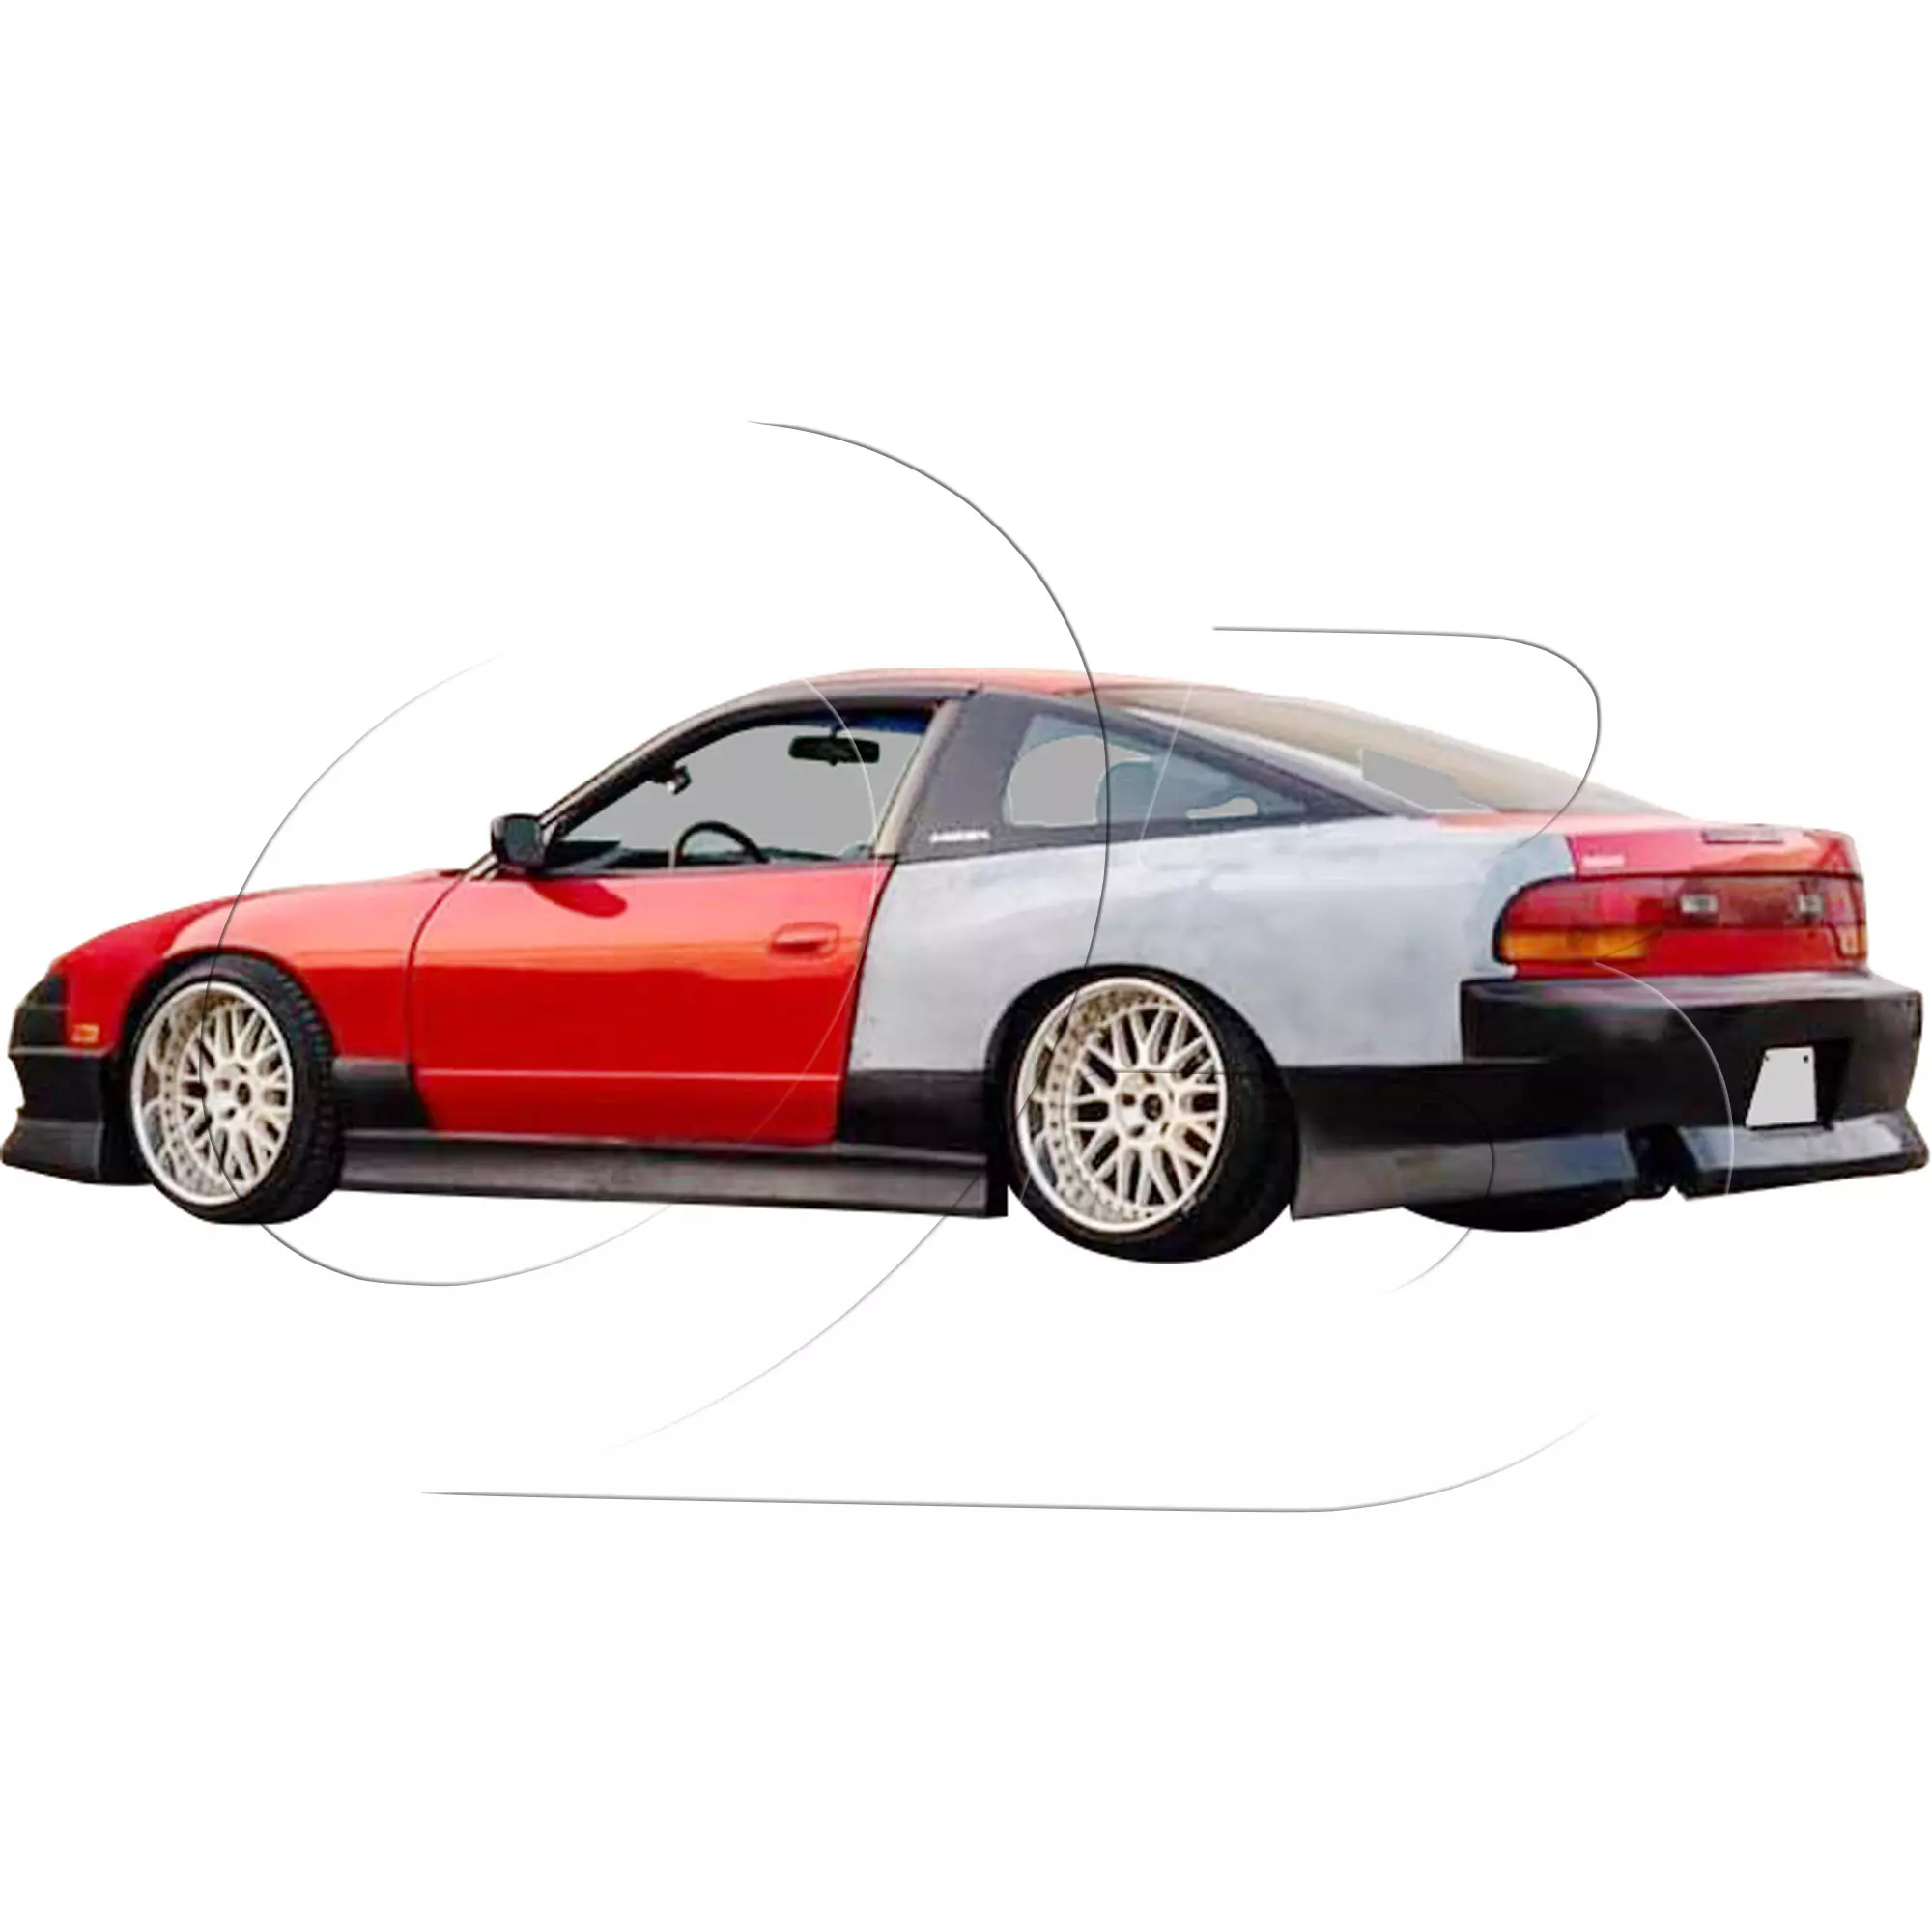 KBD Urethane Bsport2 Style 4pc Full Body Kit > Nissan 240SX 1989-1994 > 2dr Coupe - Image 51